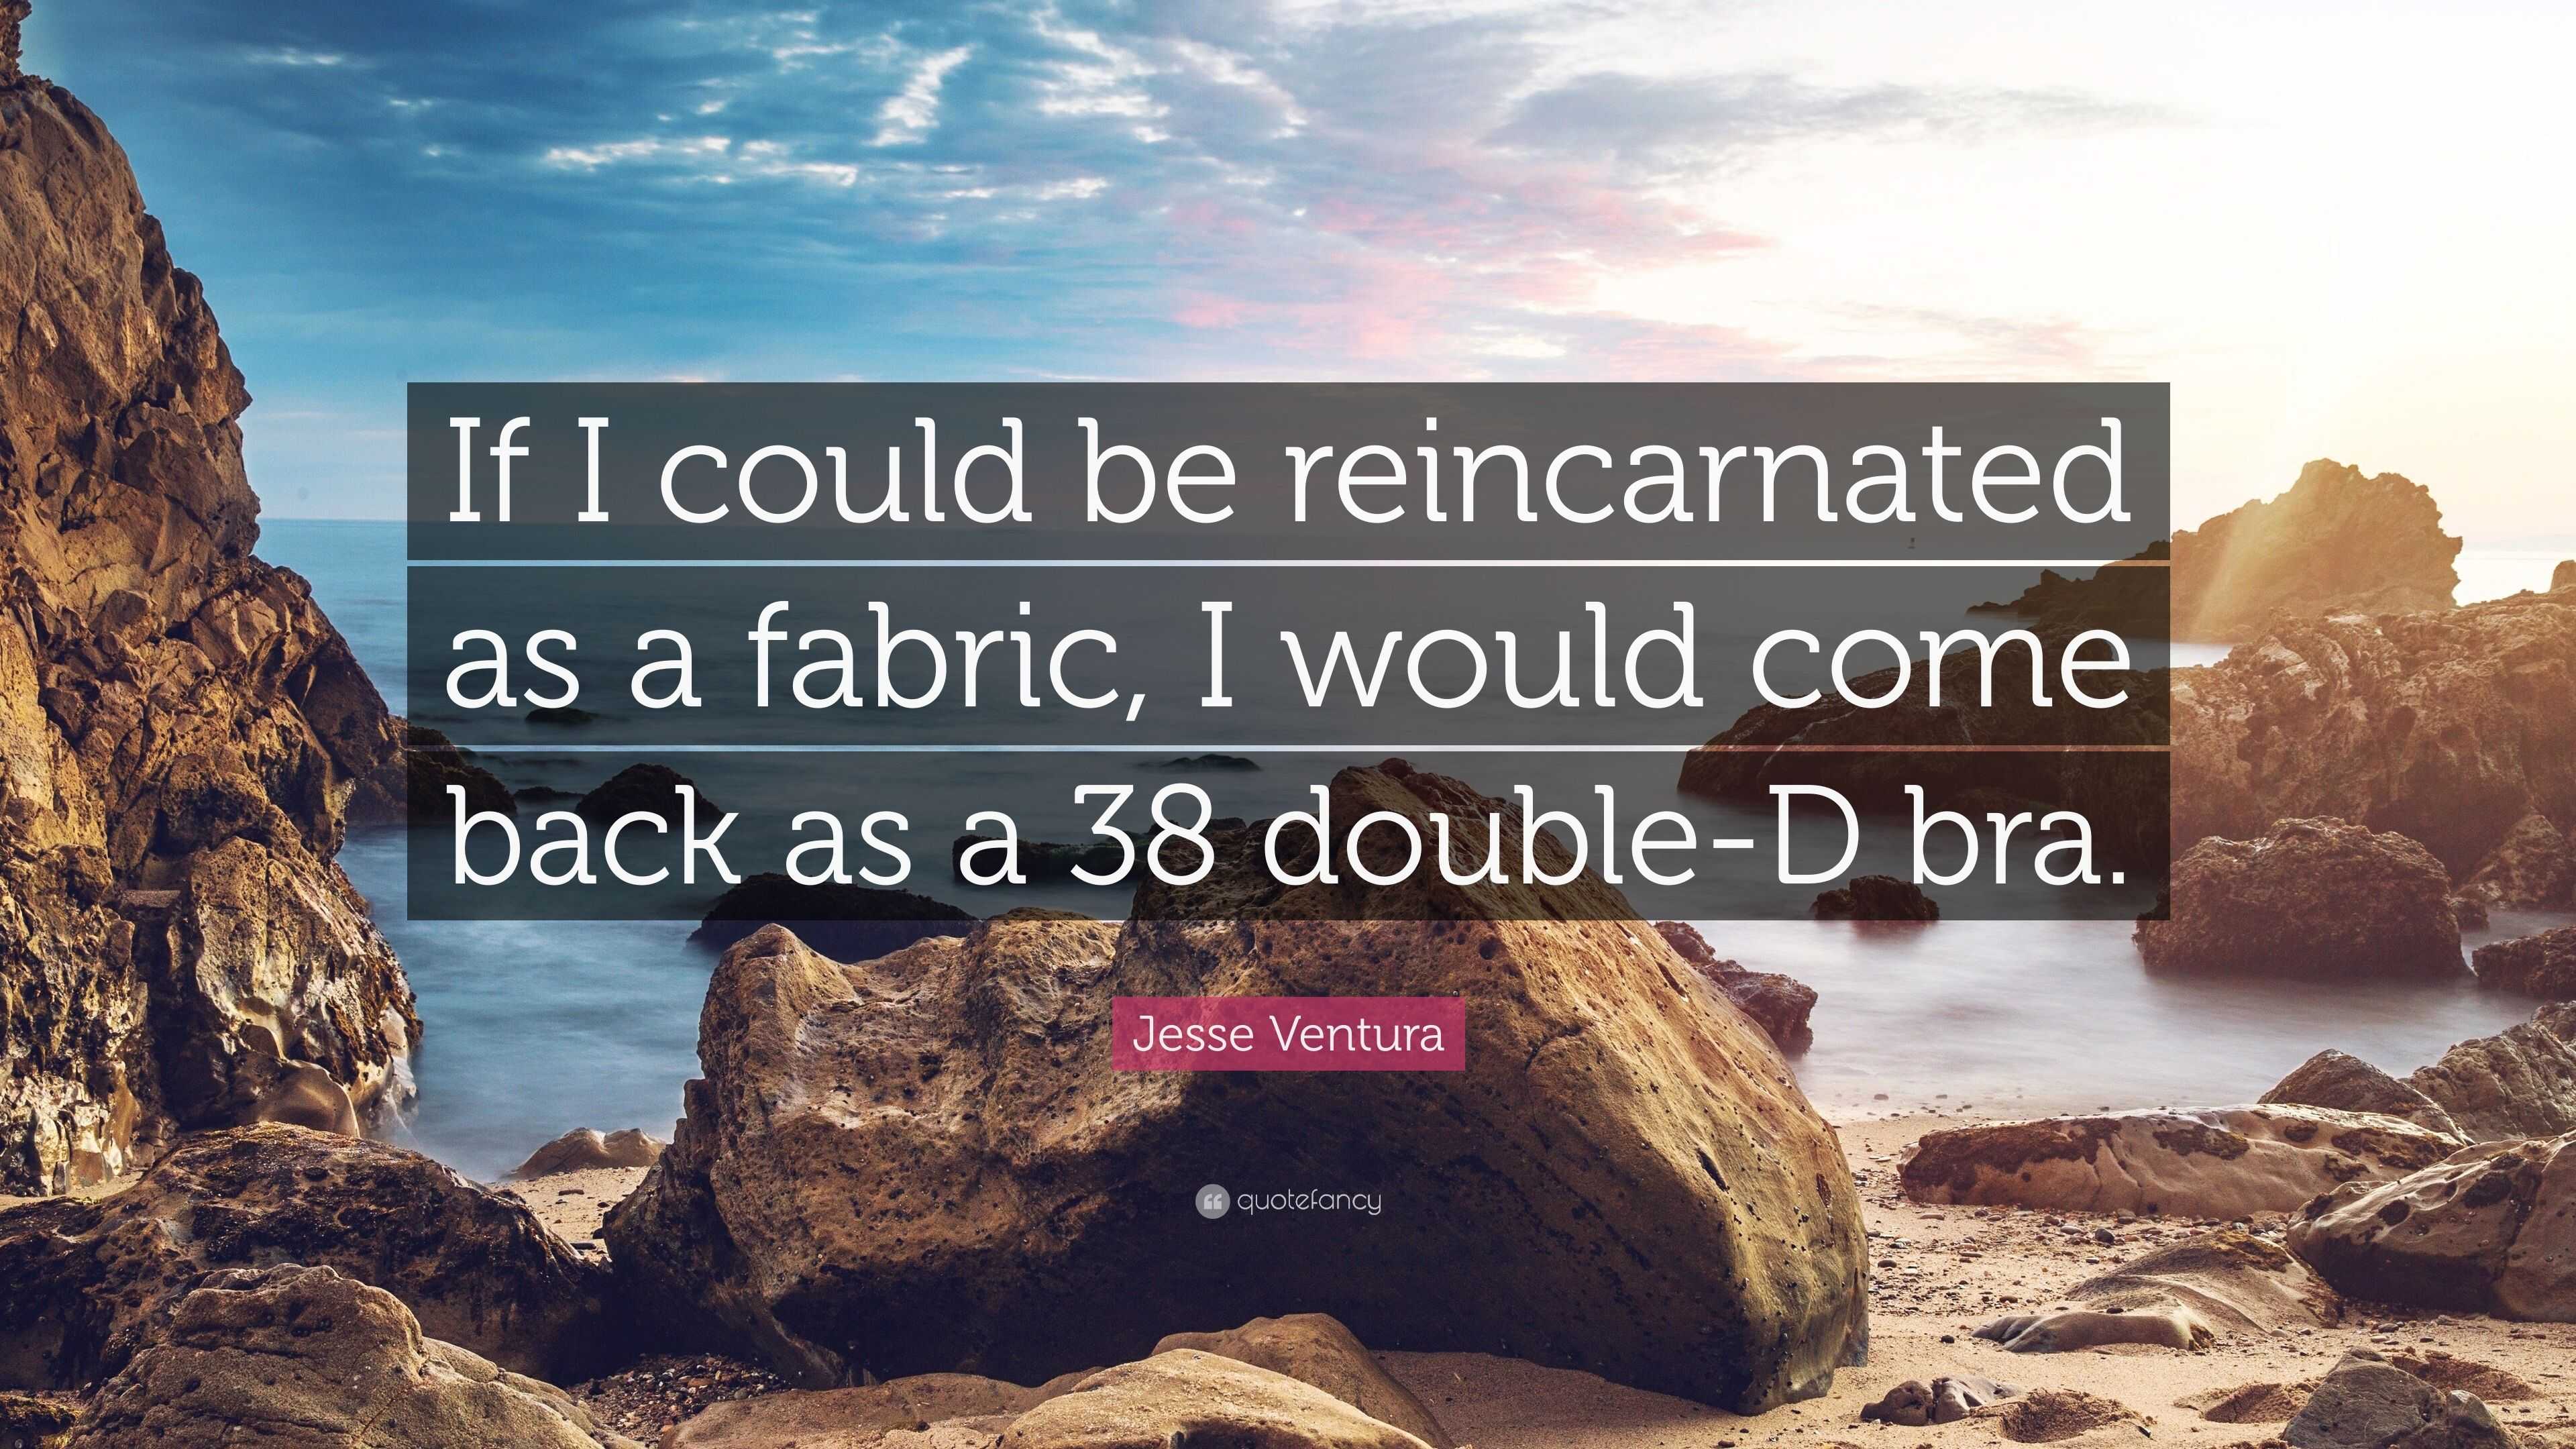 Jesse Ventura Quote: “If I could be reincarnated as a fabric, I would come  back as